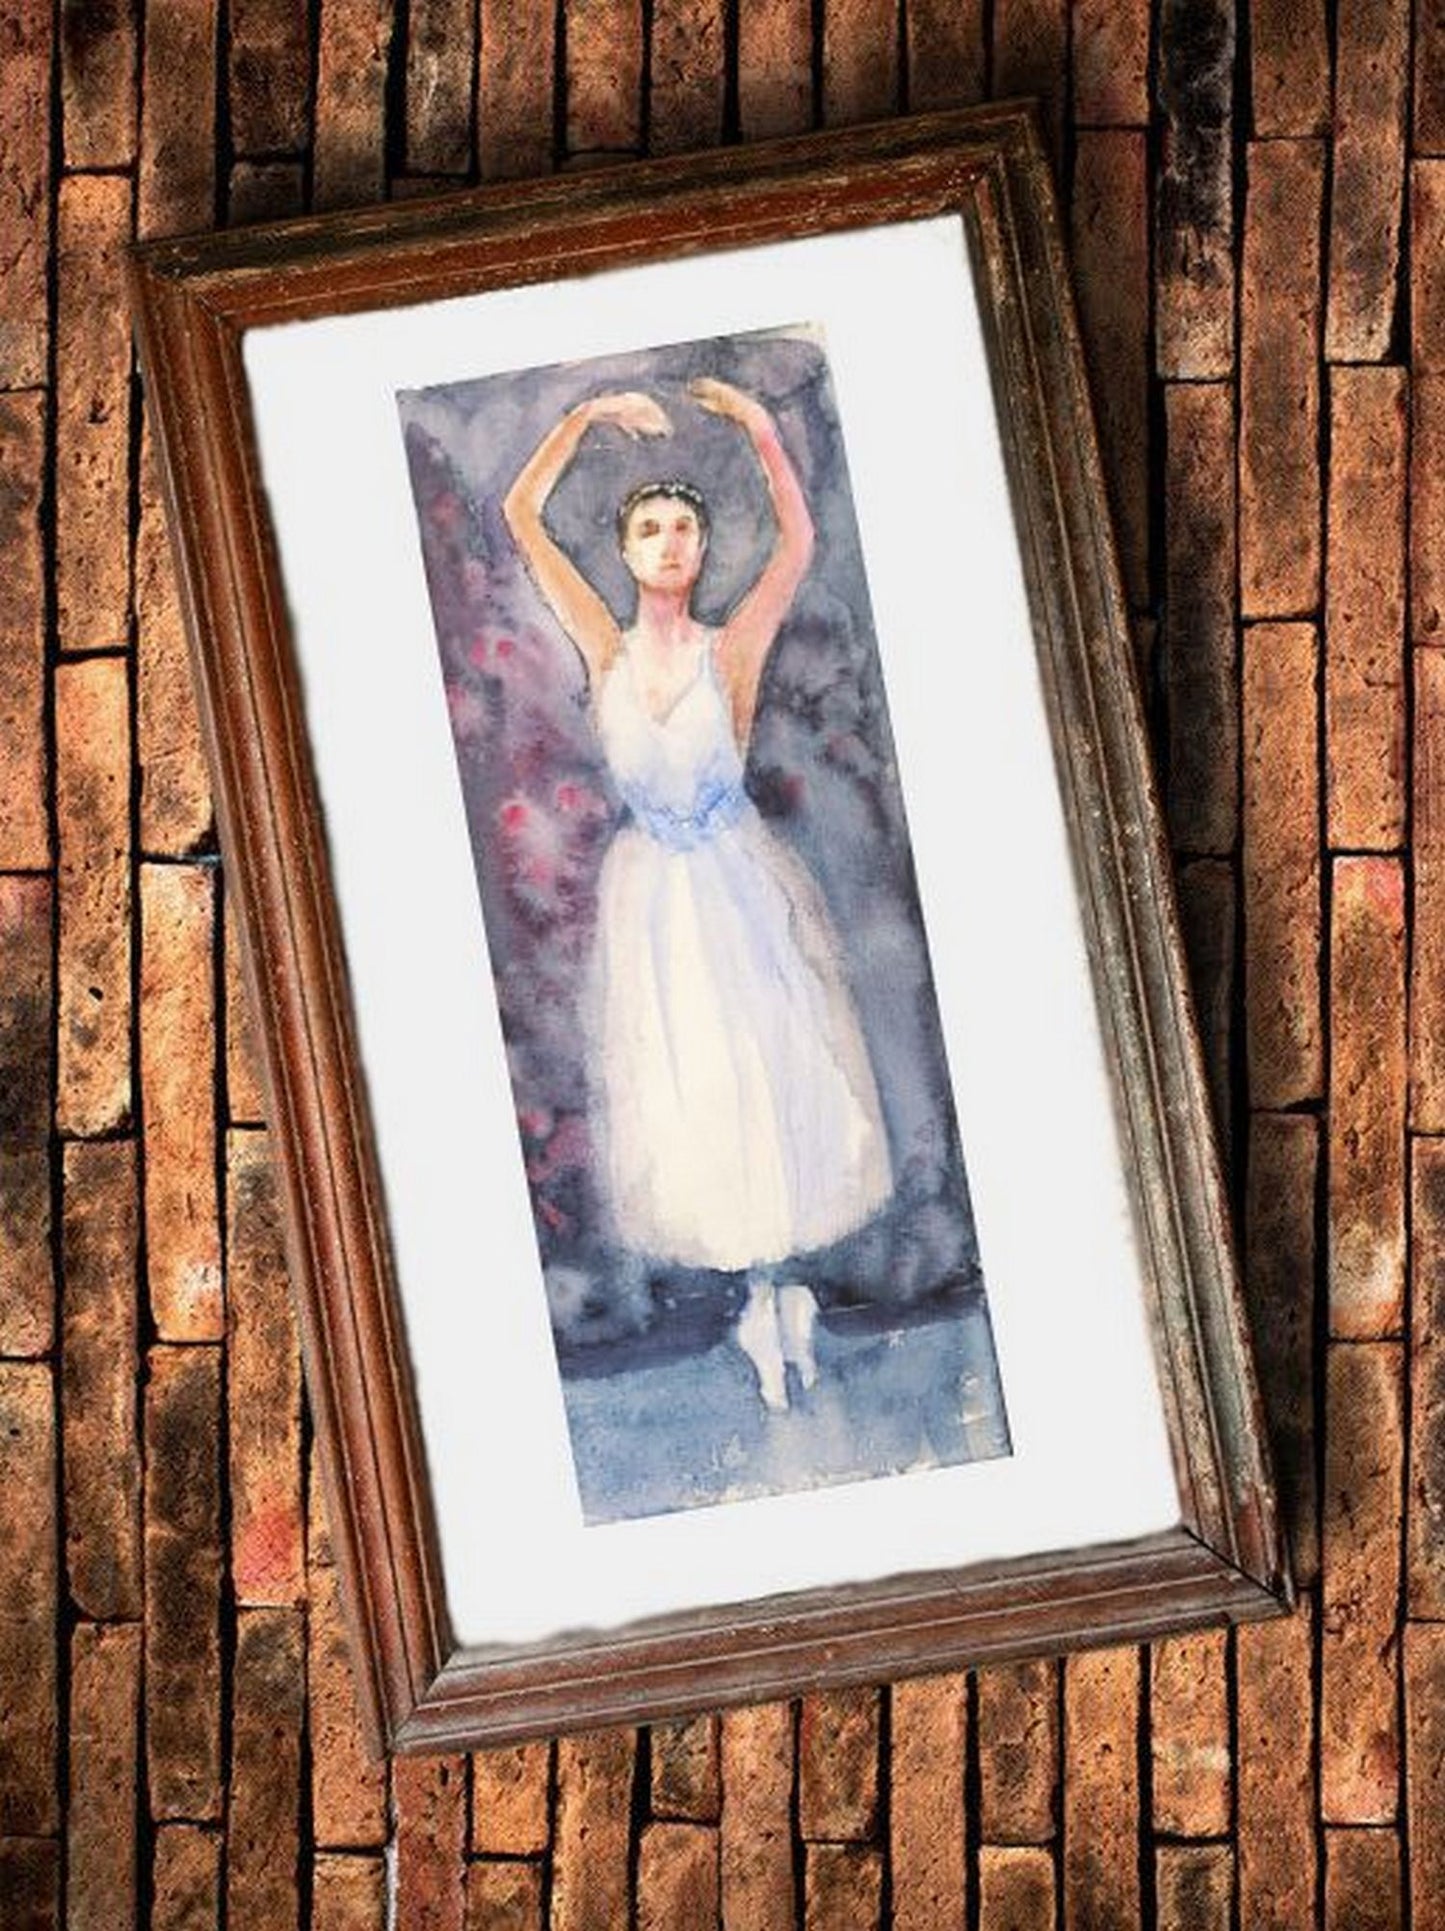 Ballerina on the stage, in a virtual frame